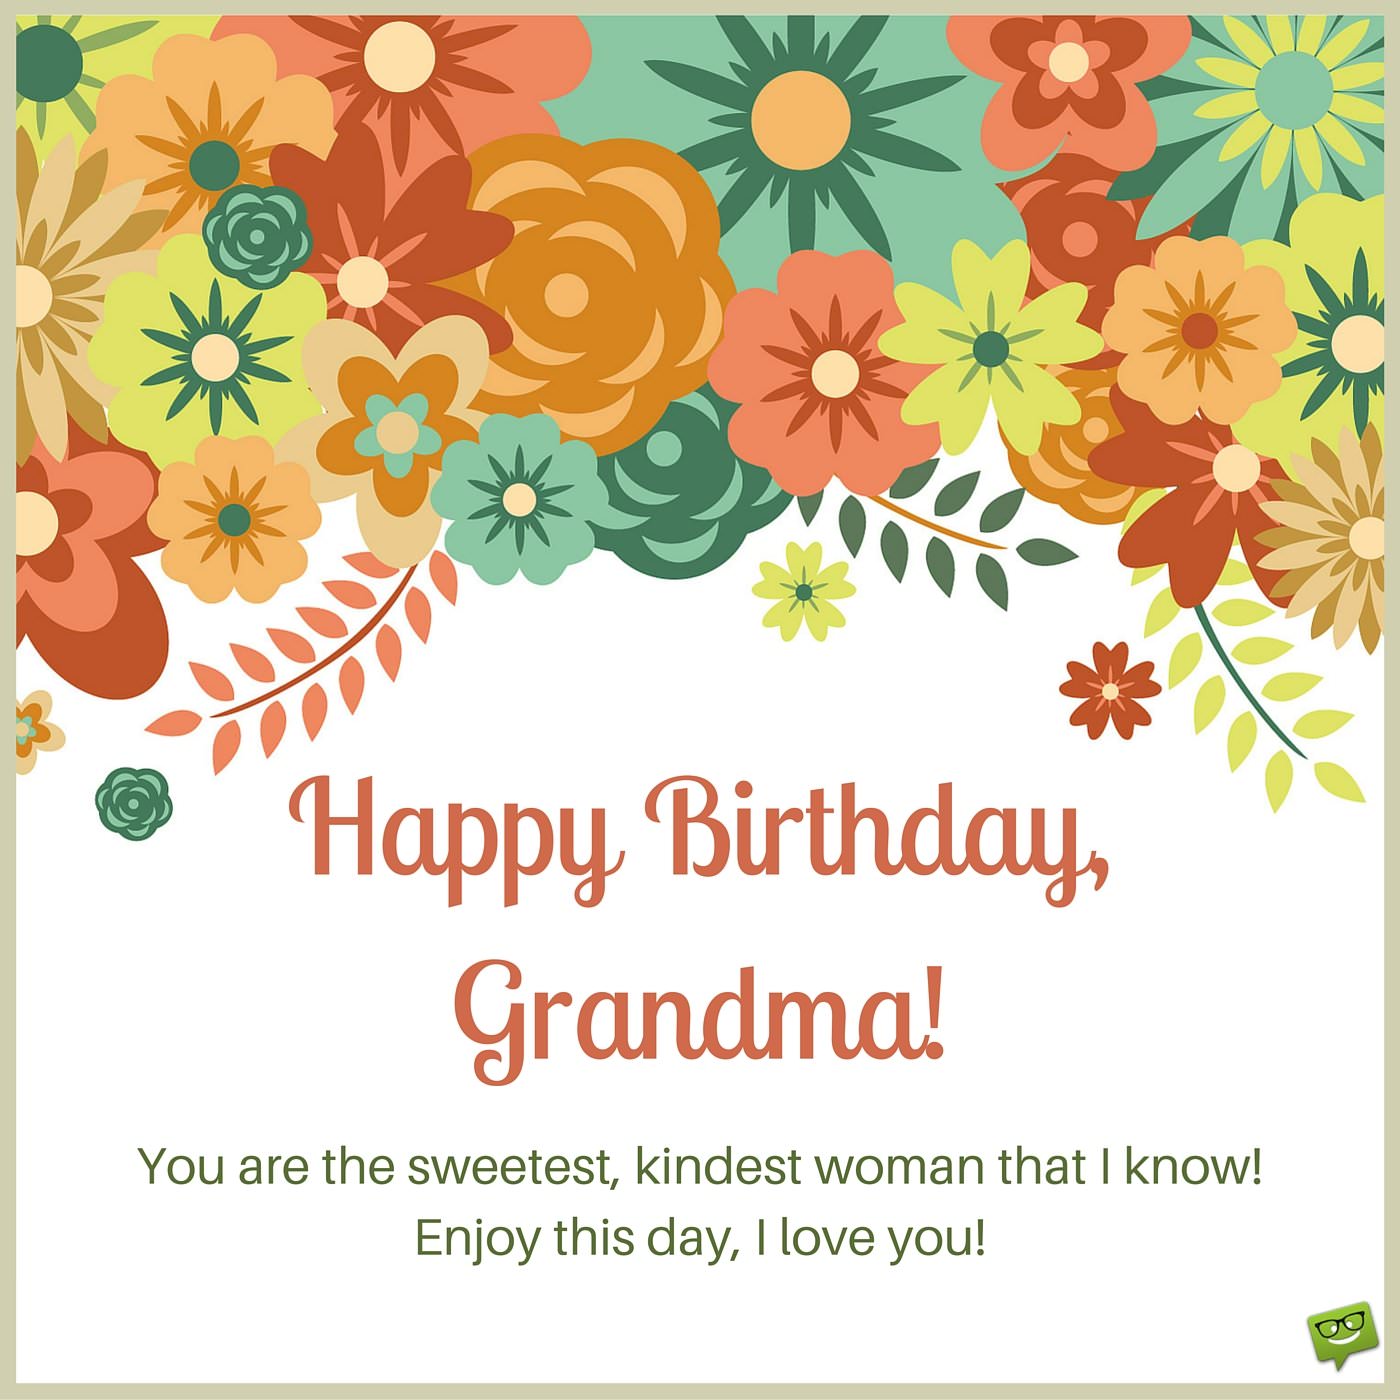 70 Touching Birthday Wishes for Grandma's Special Day